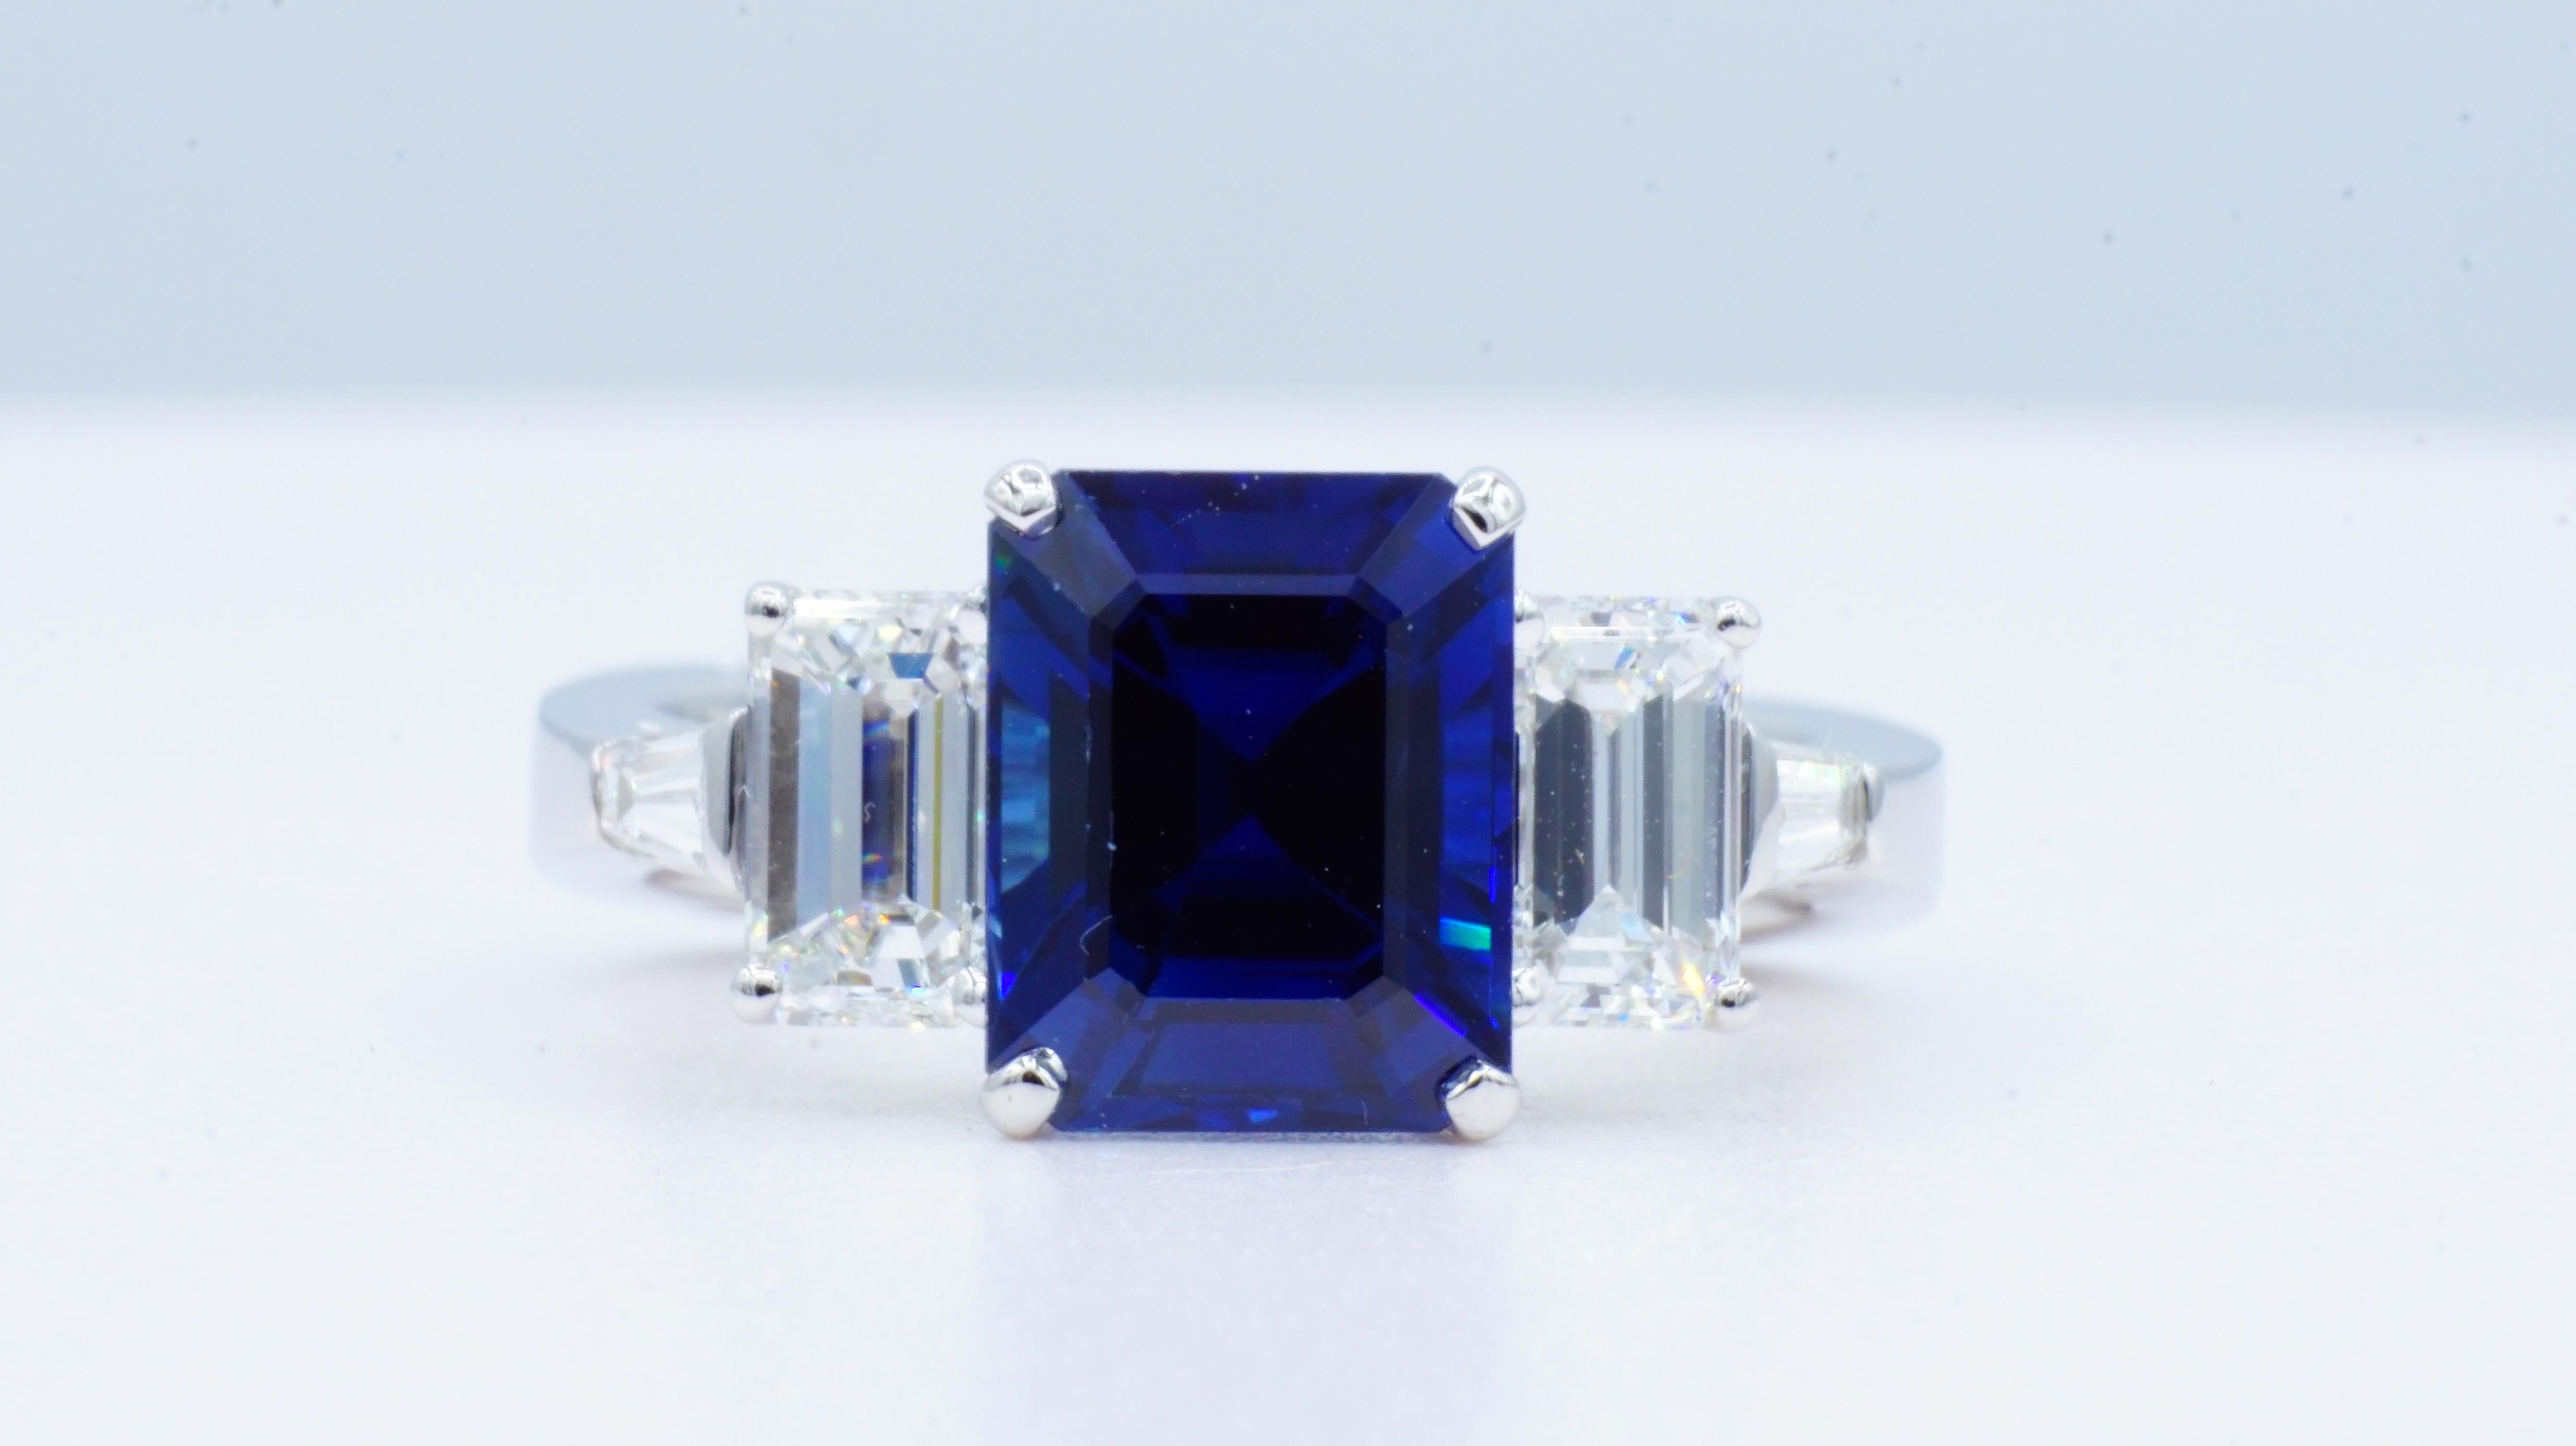 Elegant three-stone cathedral-style platinum ring with an approximately  4.62ct emerald cut medium blue sapphire, two emerald cut diamonds of  1.42cttw, two tapered baguette cut diamonds of .22cttw, and four round brilliant diamonds of .06cttw